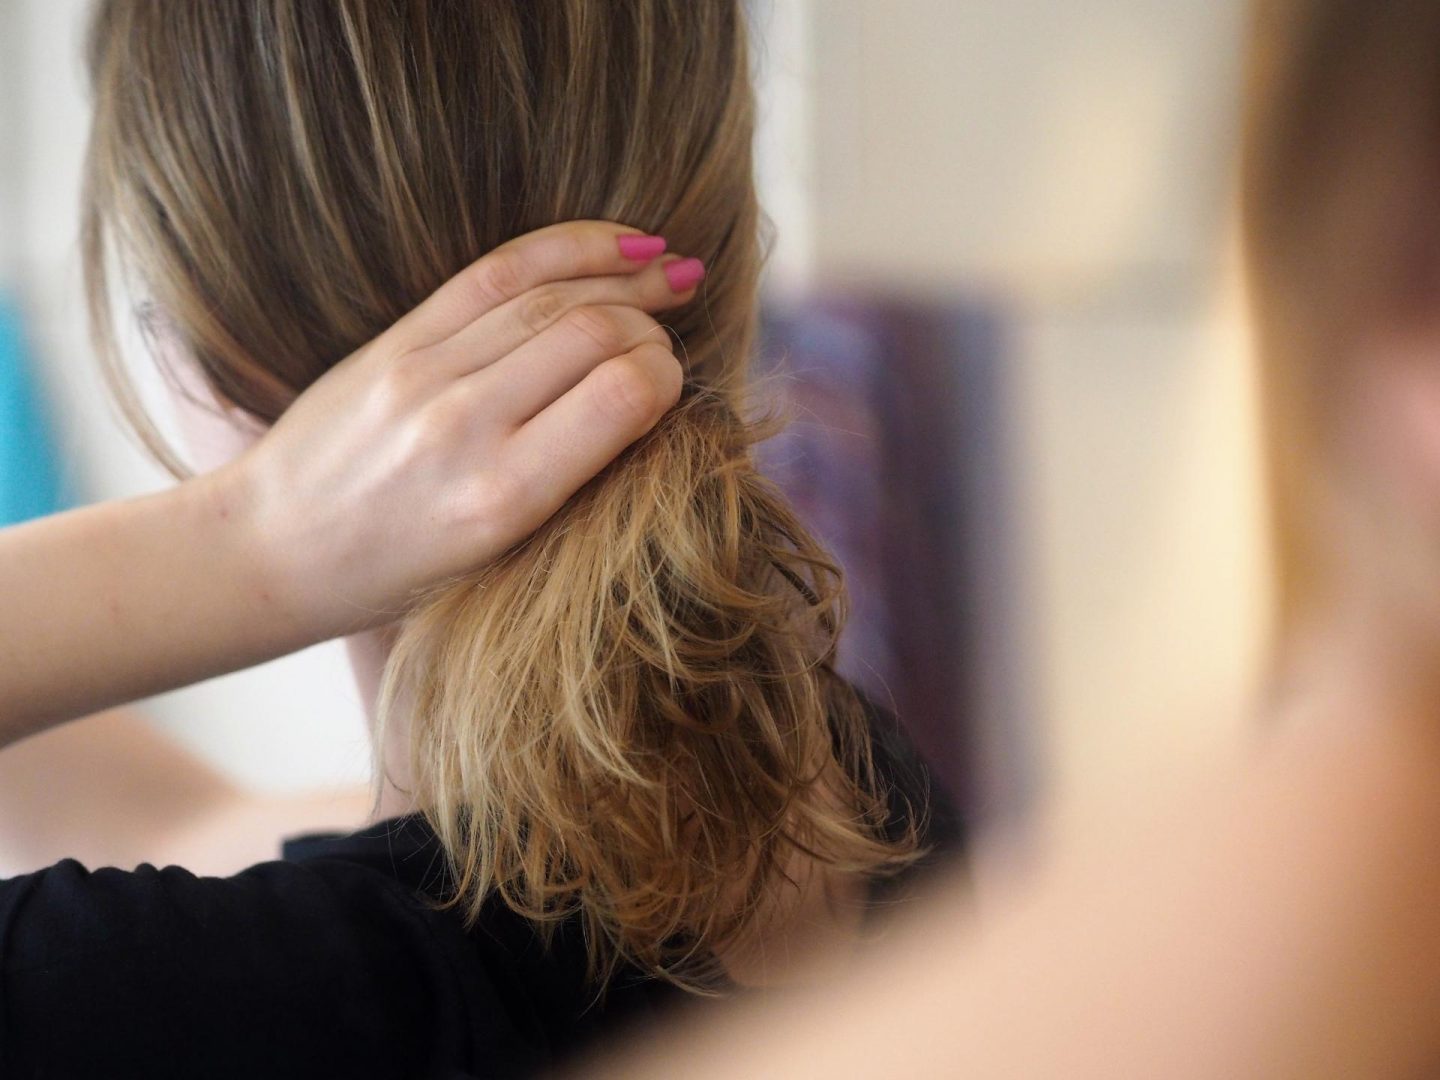 Summer Hair Care Tips: How to Reduce UV Damage to Hair